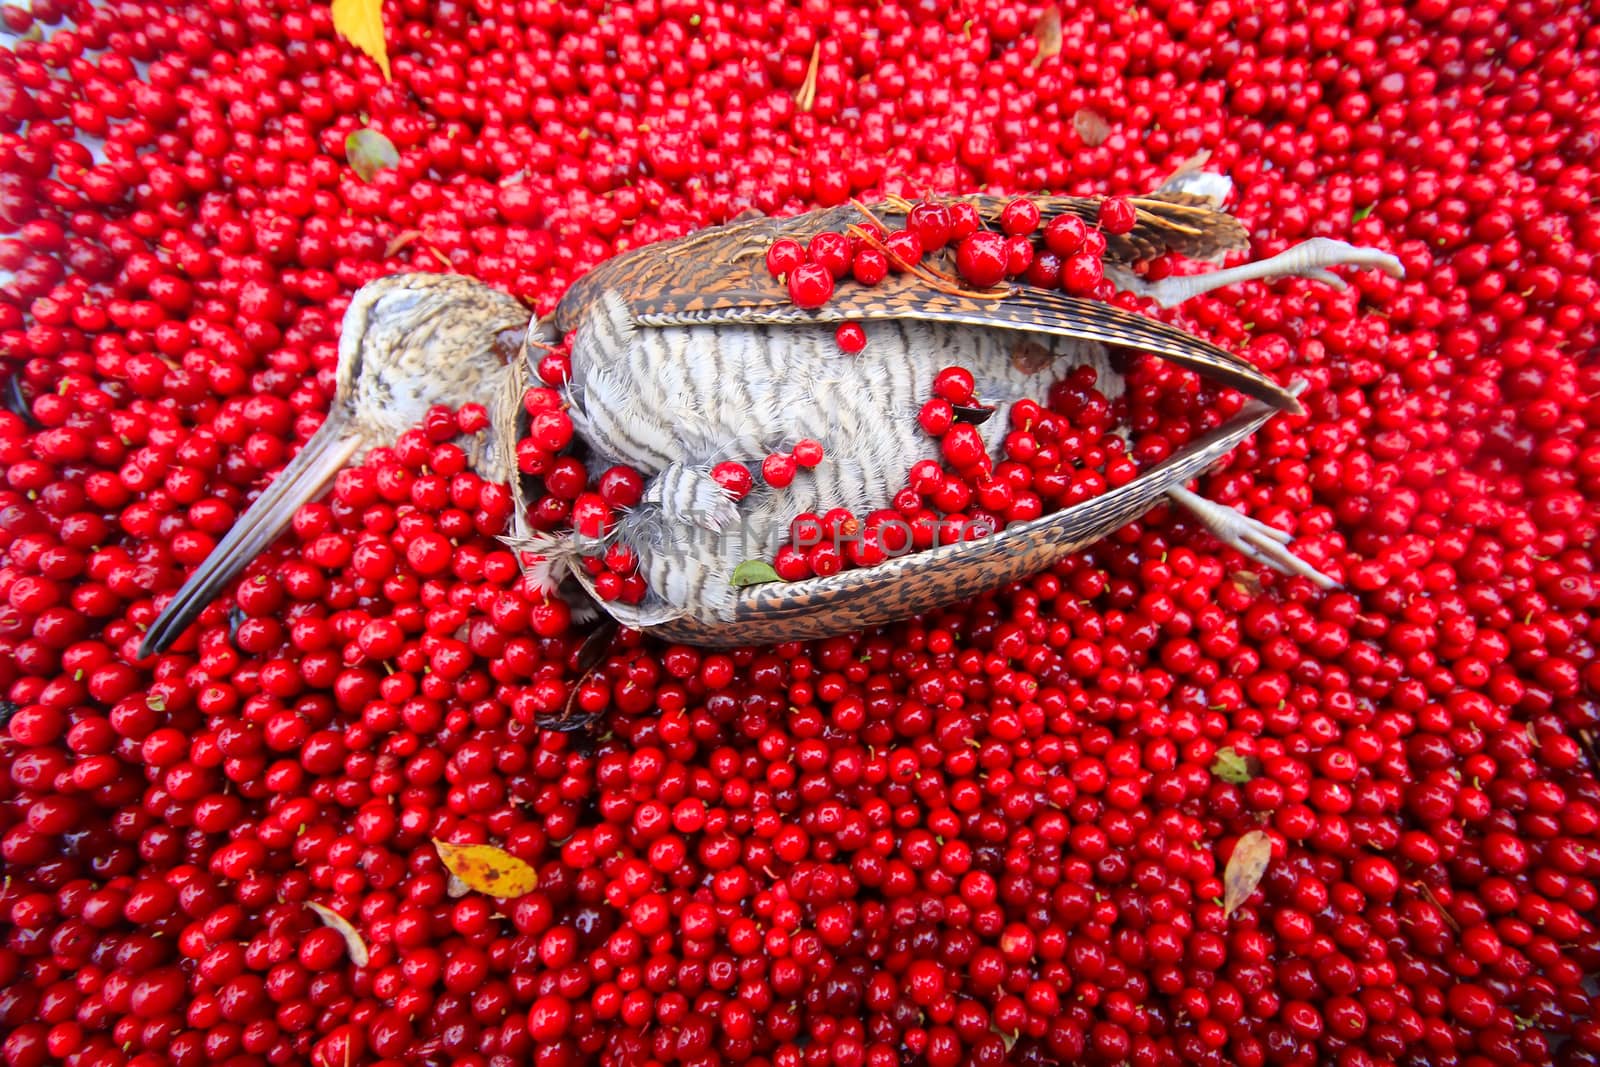 woodcock covered with red cranberries.